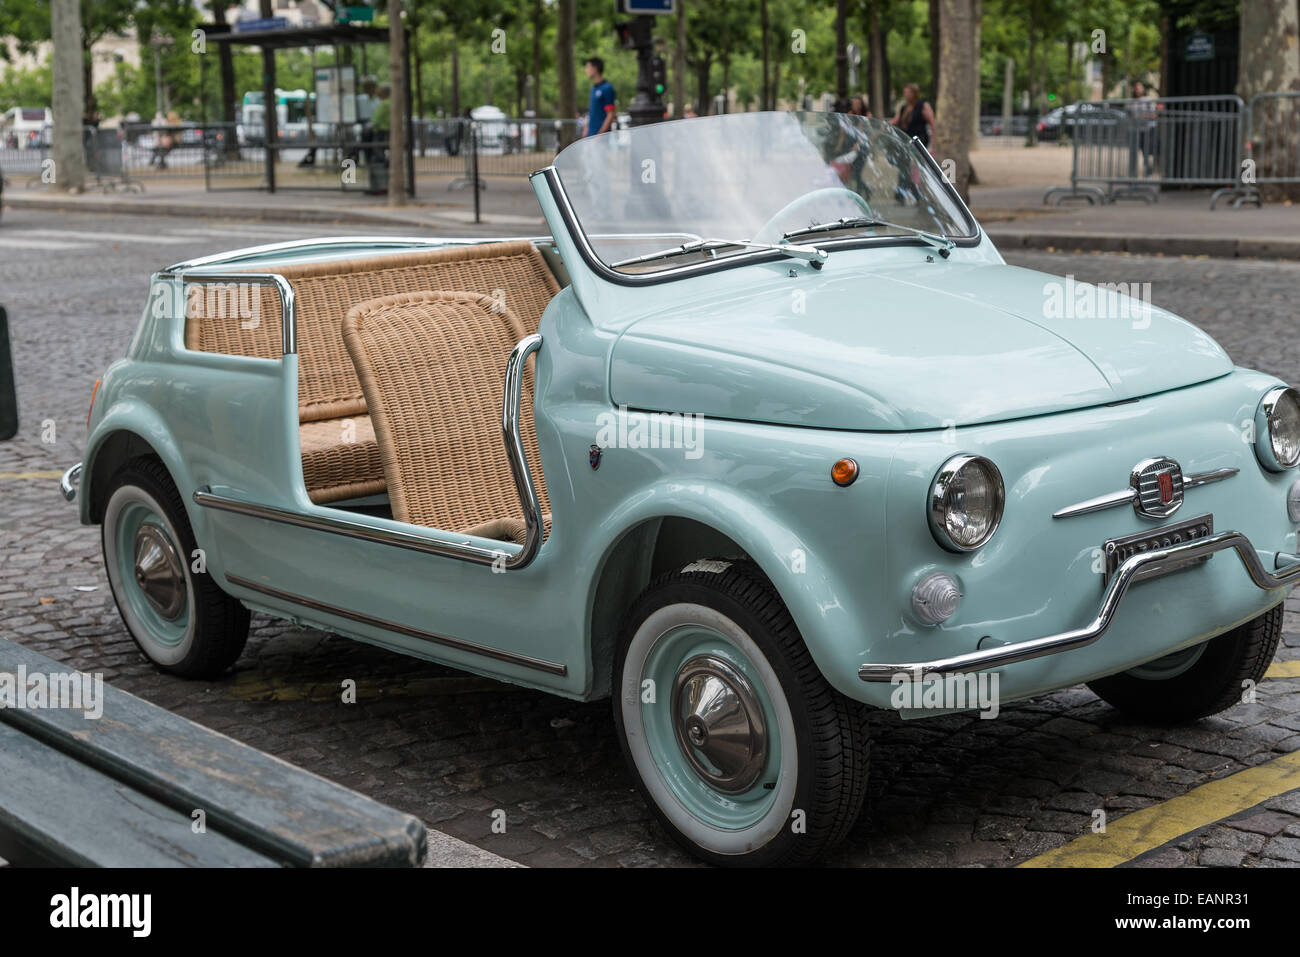 a-fiat-jolly-with-wicker-seats-found-on-the-streets-of-paris-france-EANR31.jpg